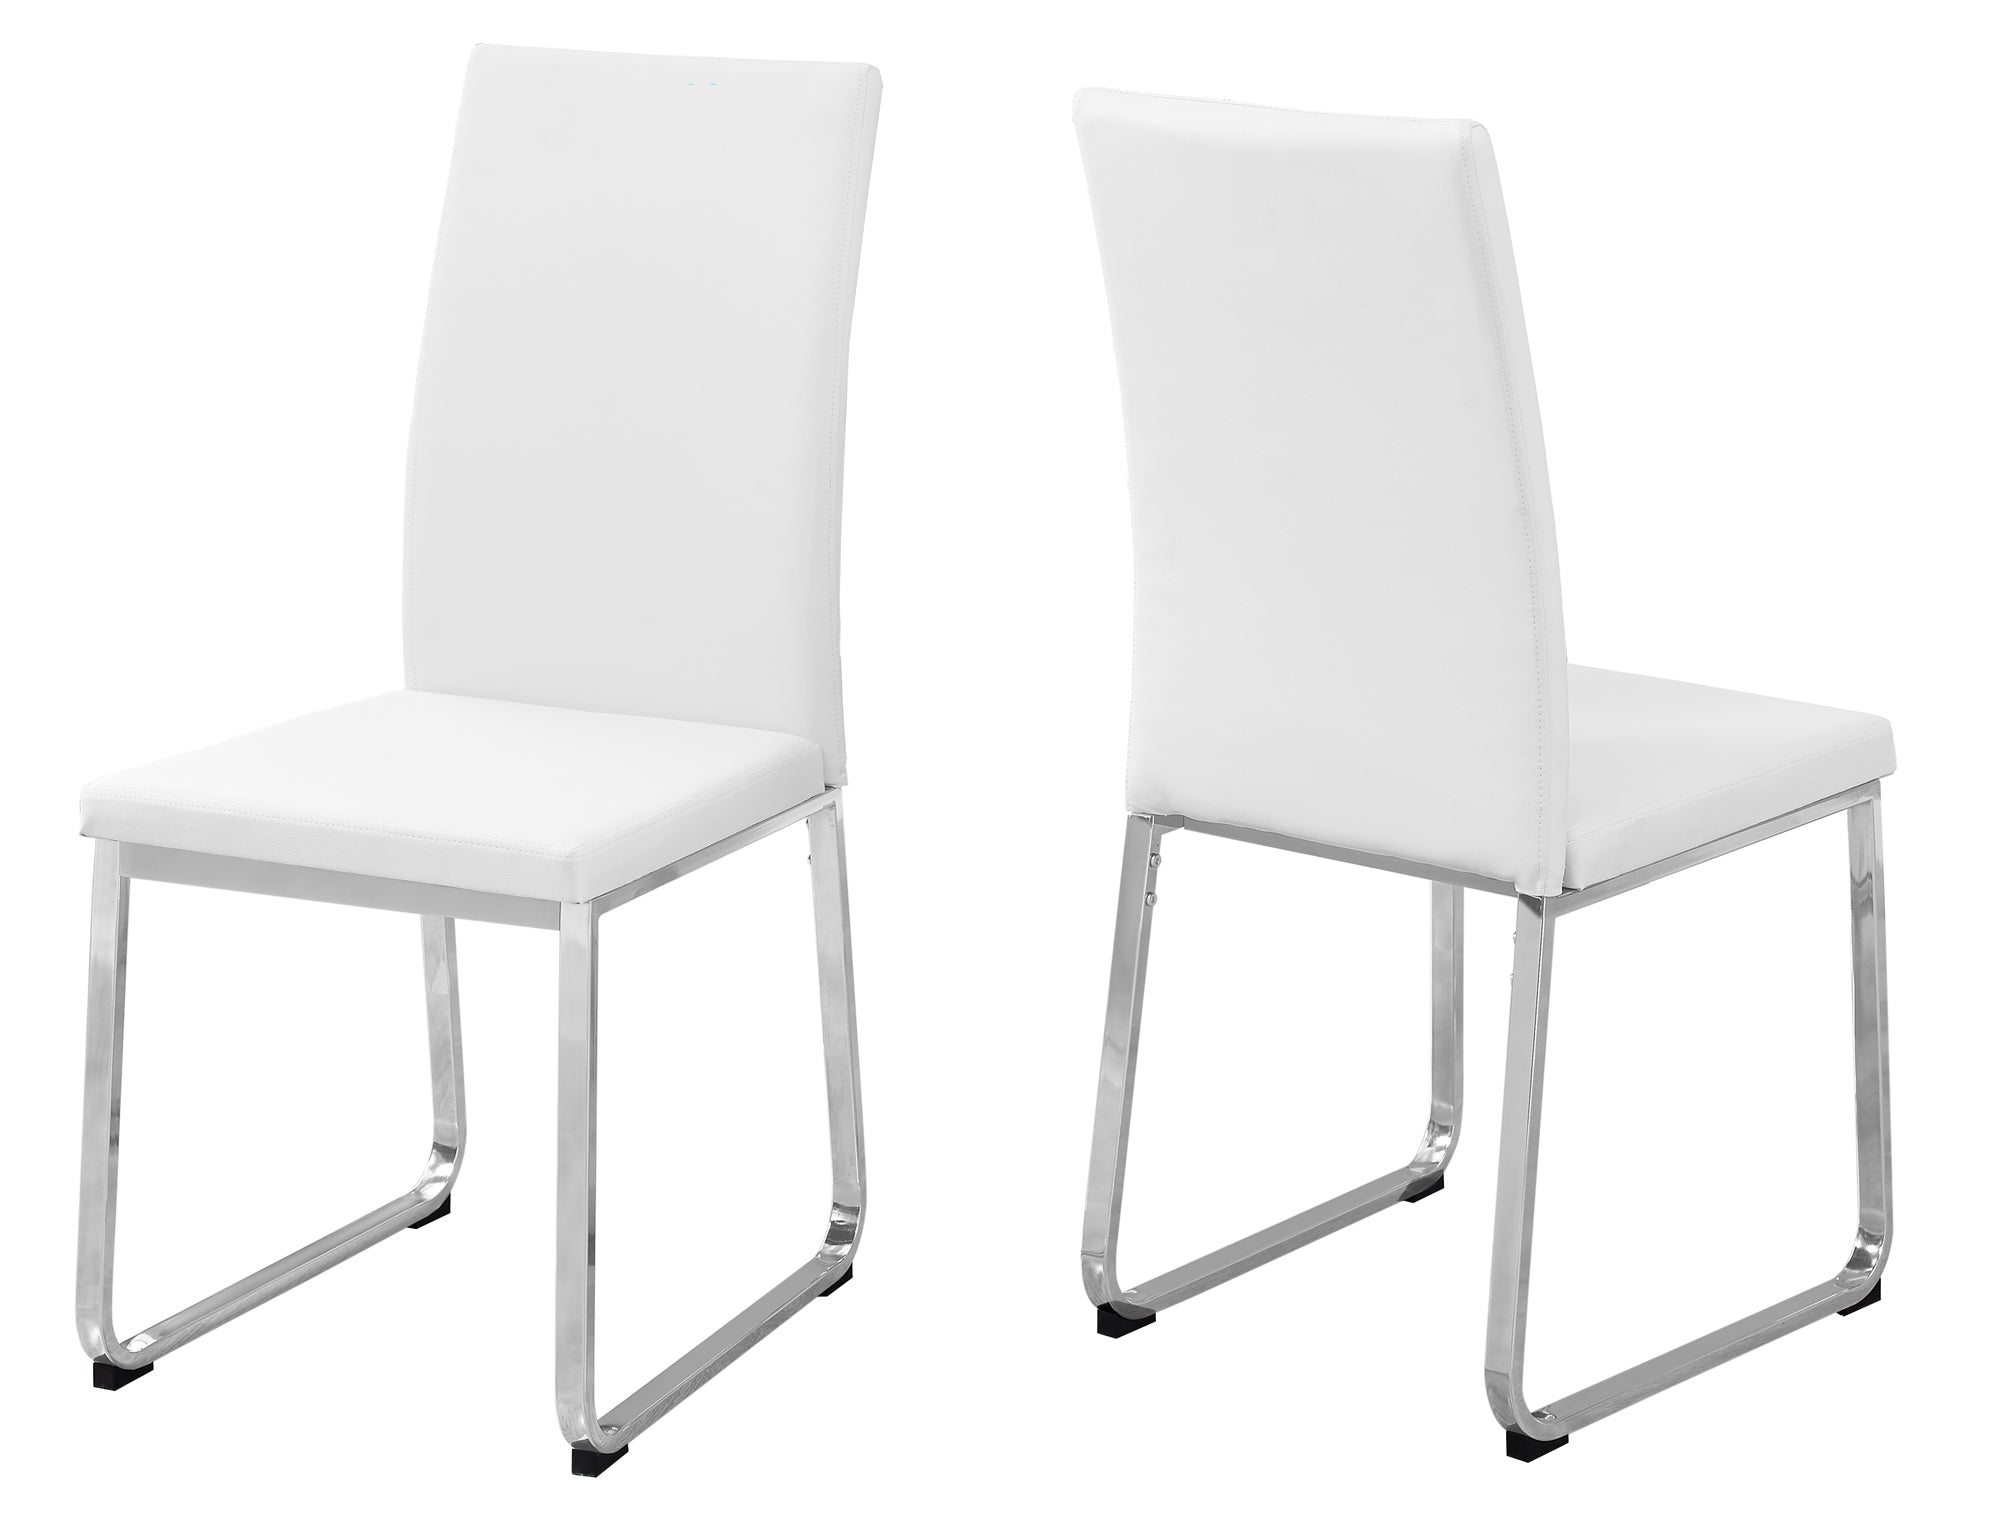 Dining Chair - 2Pcs / 38H / White Leather-Look / Chrome